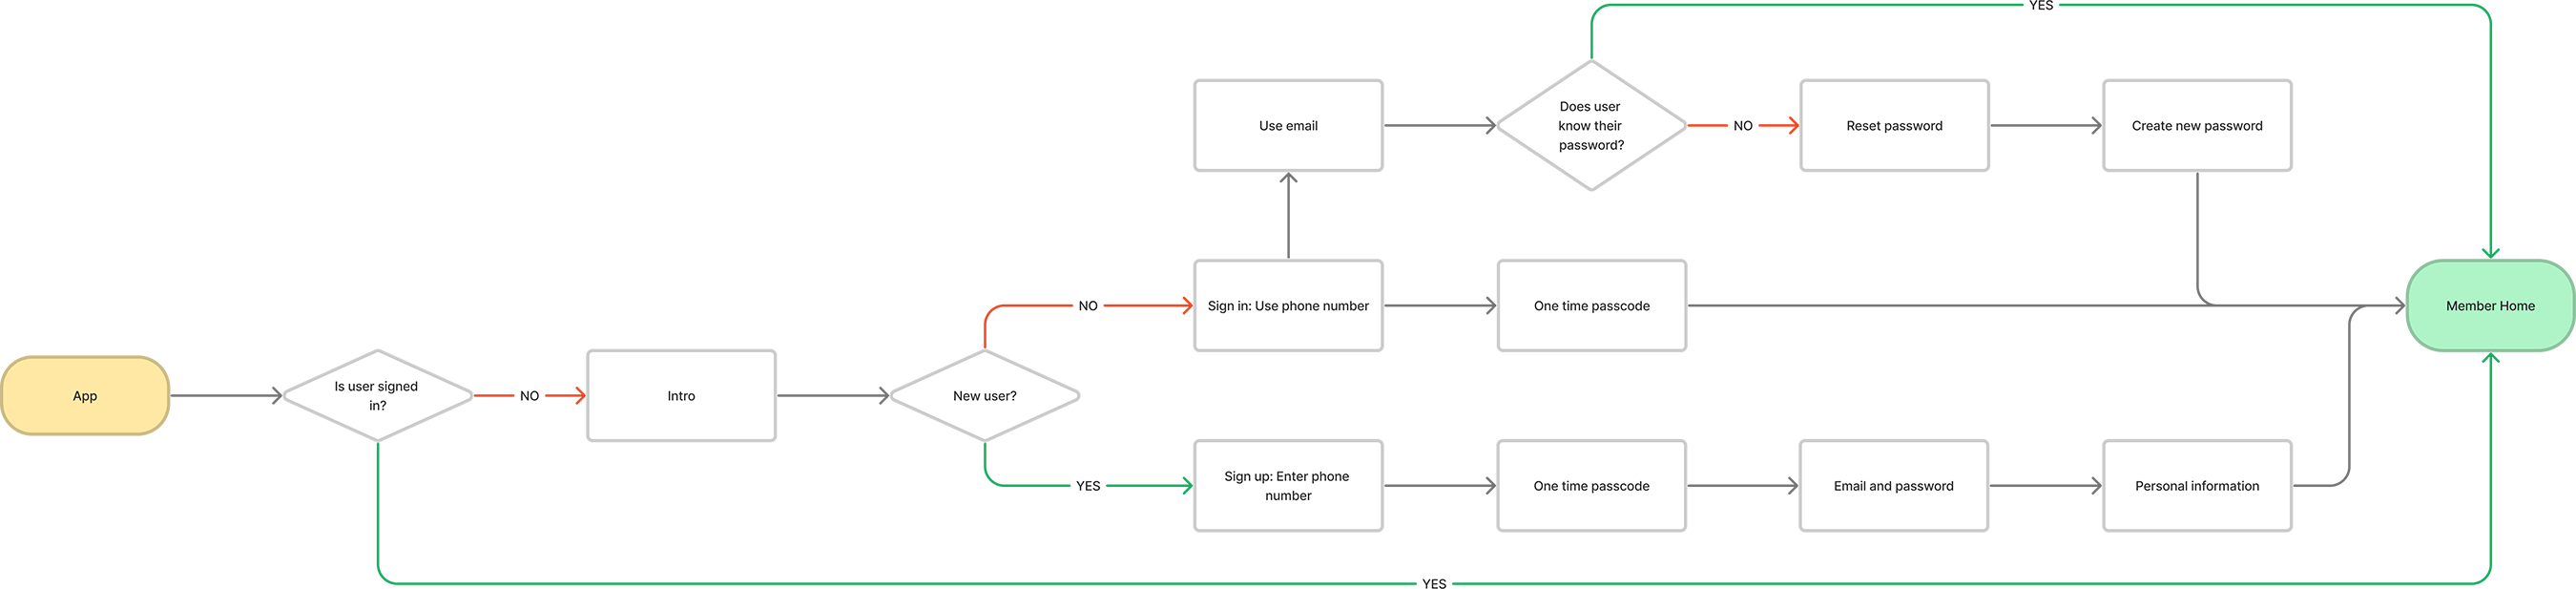 User flow depicting the paths a user can take when opening the app